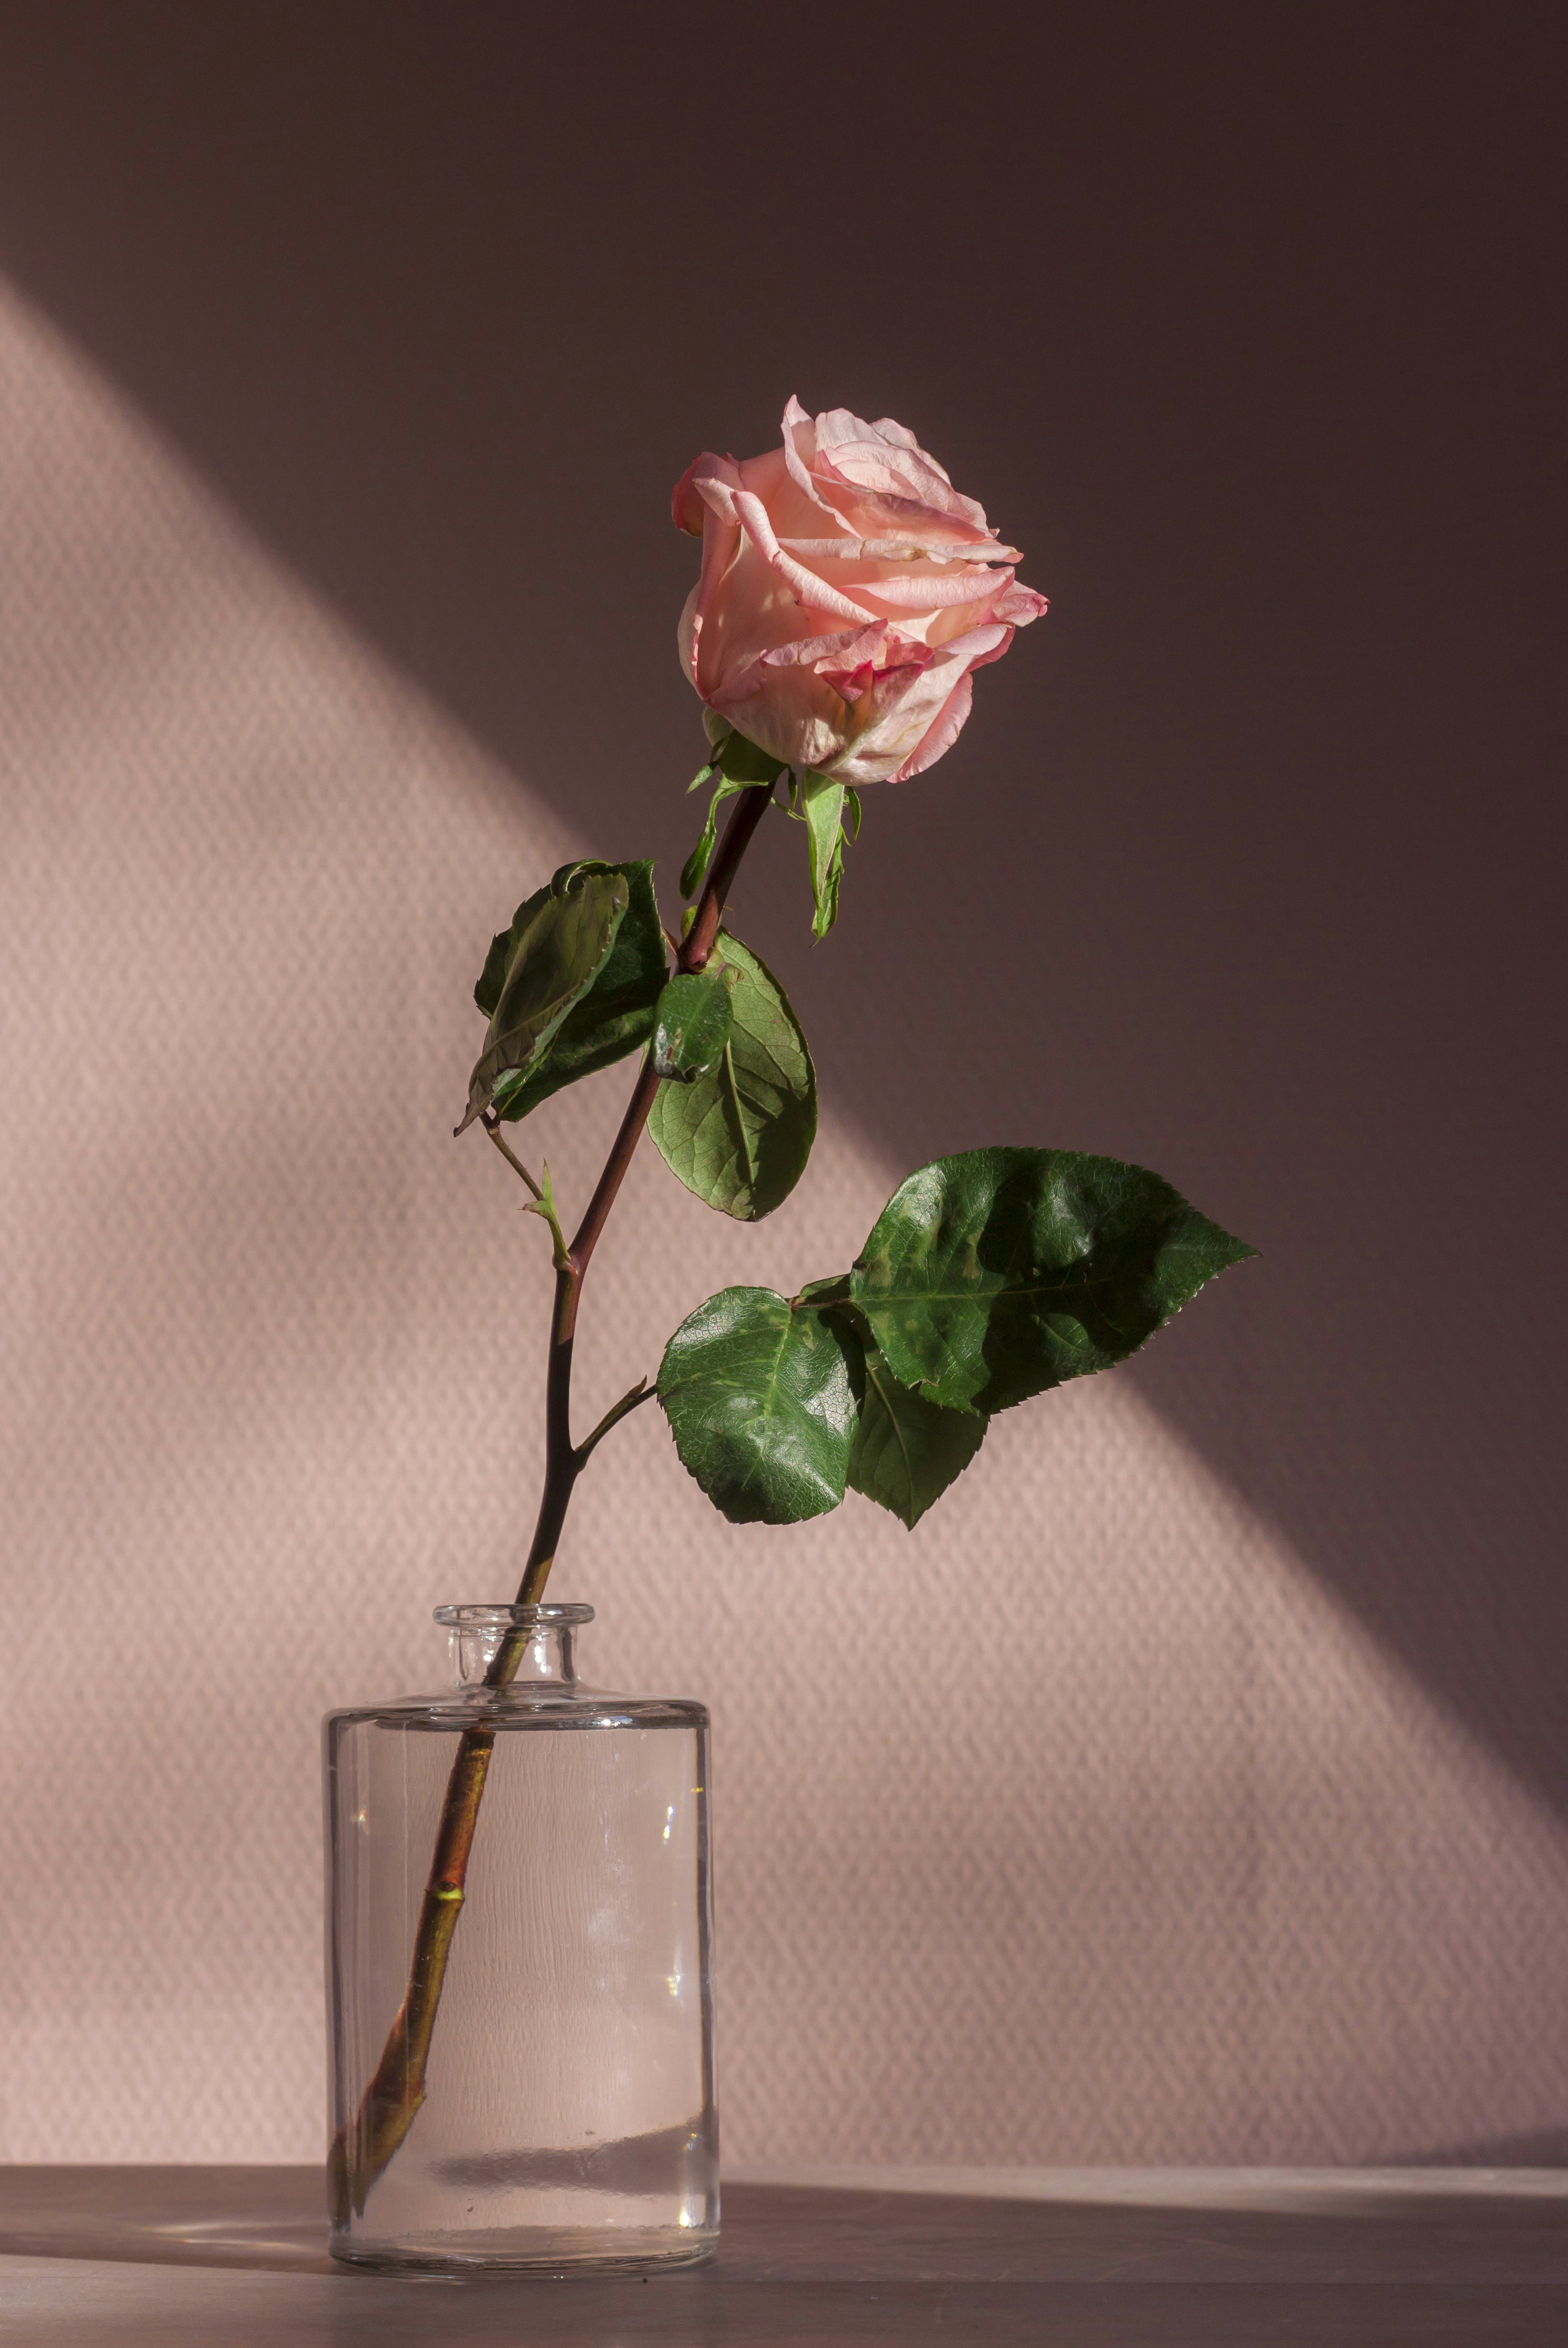 great photo recipe,how to photograph for our first valentine together my boyfriend gifted me one of the most beautiful roses that i’ve ever seen. the color was a great match for our wallpaper, which you can see in the background.; pink flower